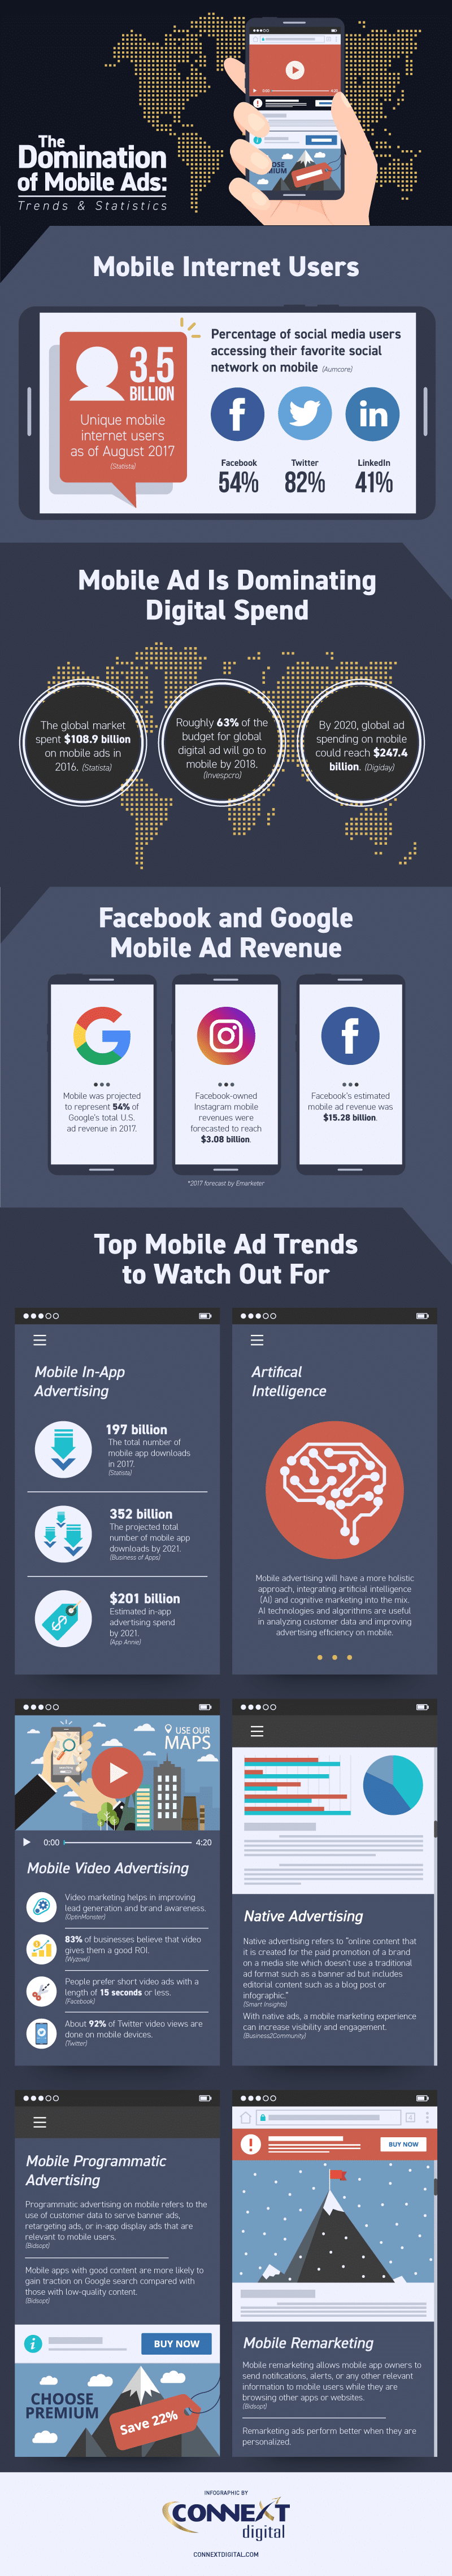 Domination of Mobile Ads